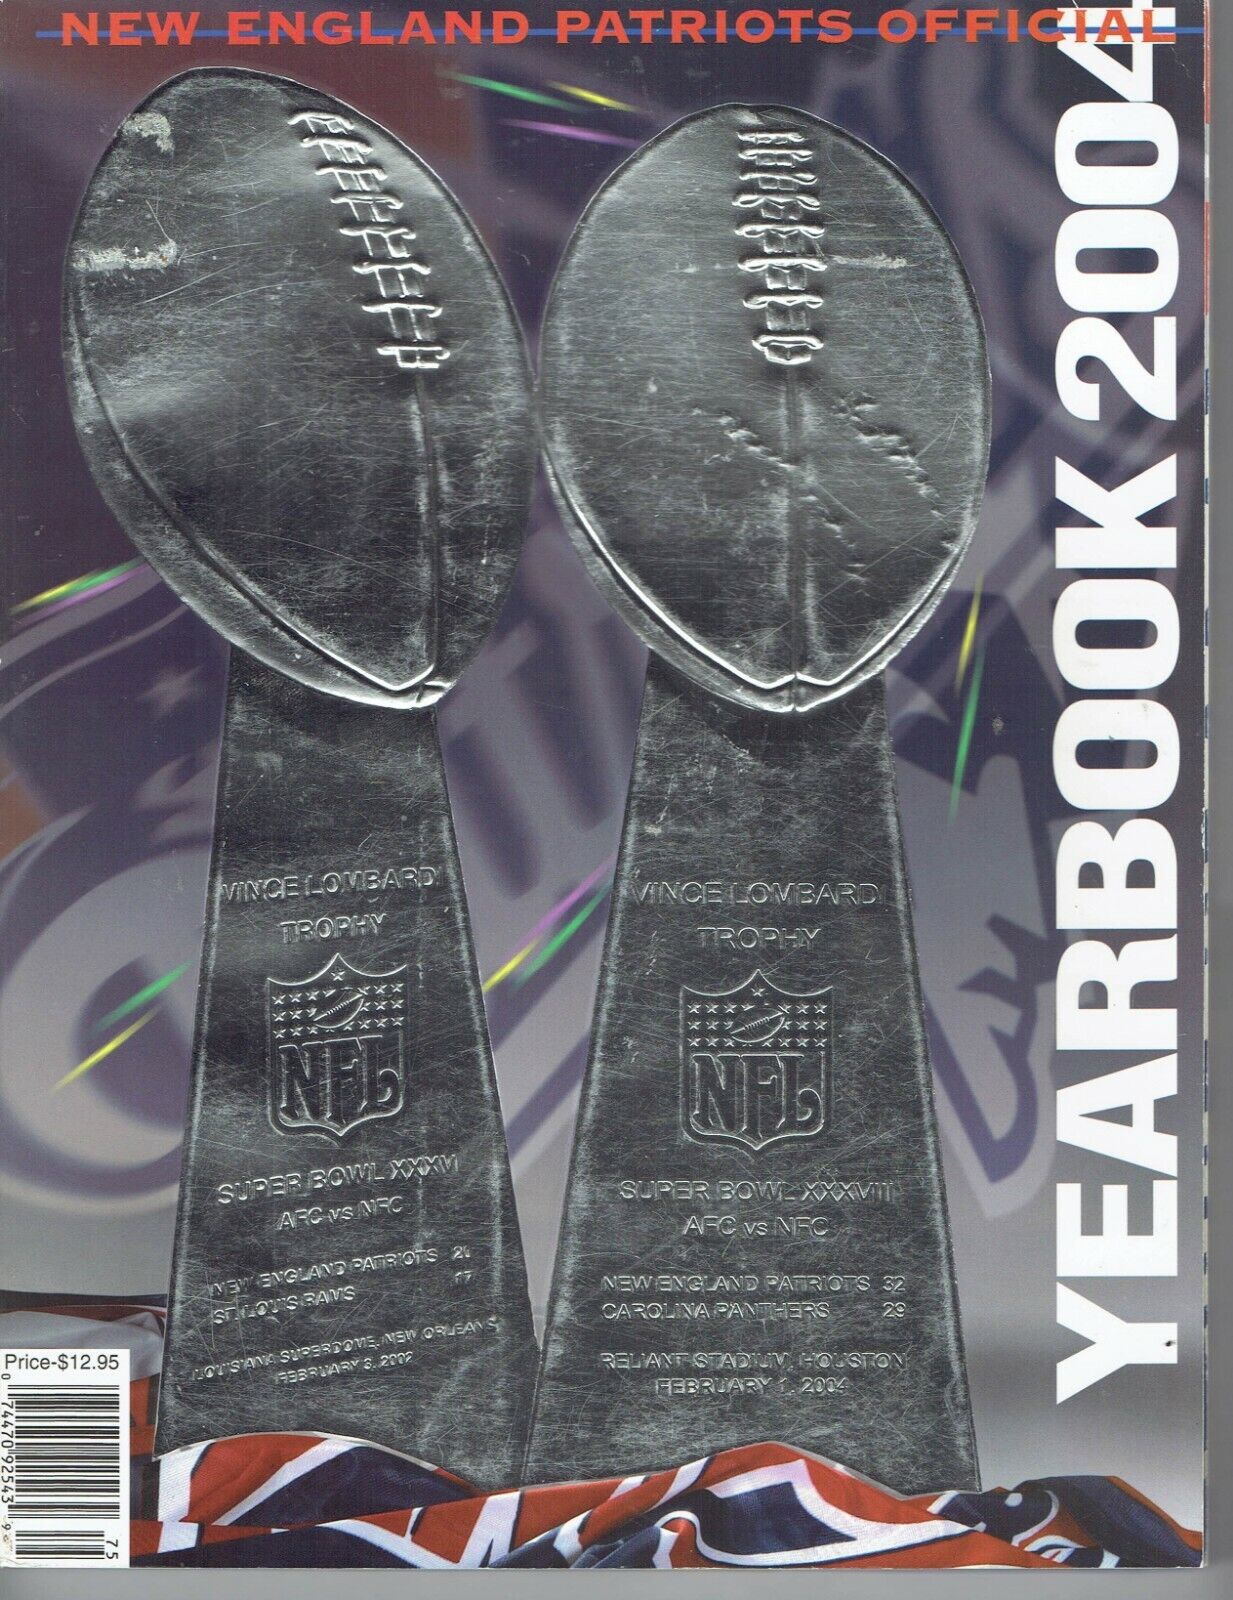 Primary image for 2004 NFL New England Patriots Yearbook Football